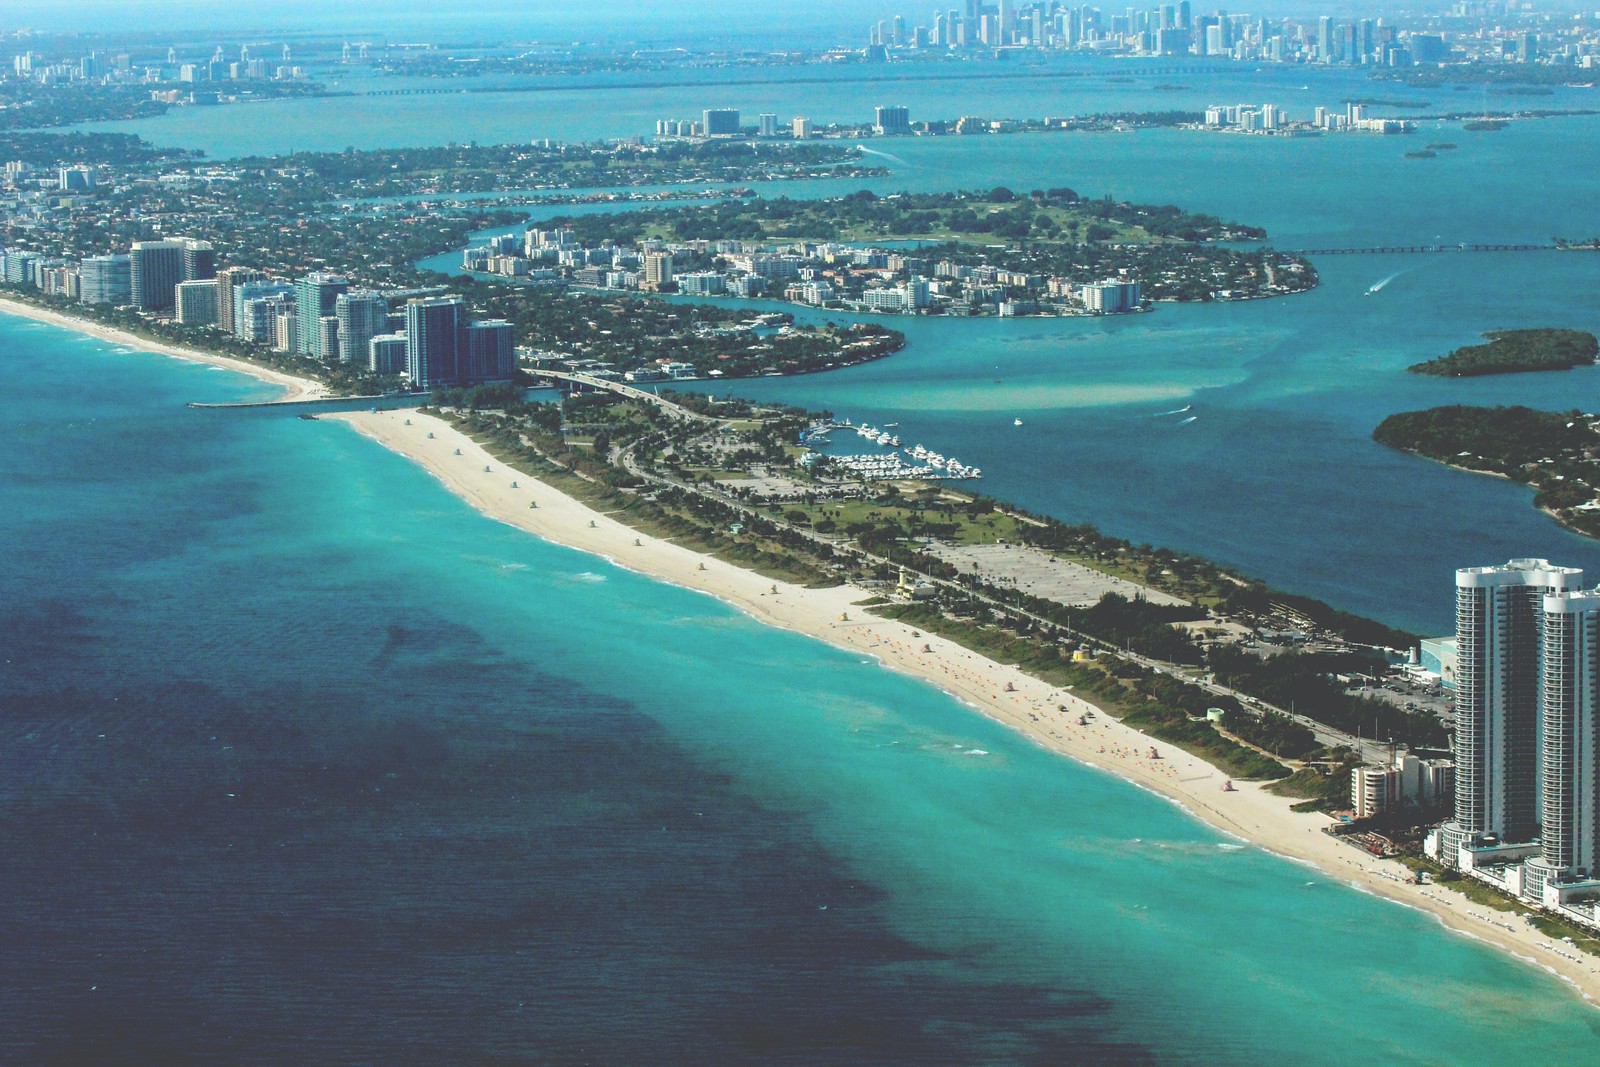 Miami from the sky